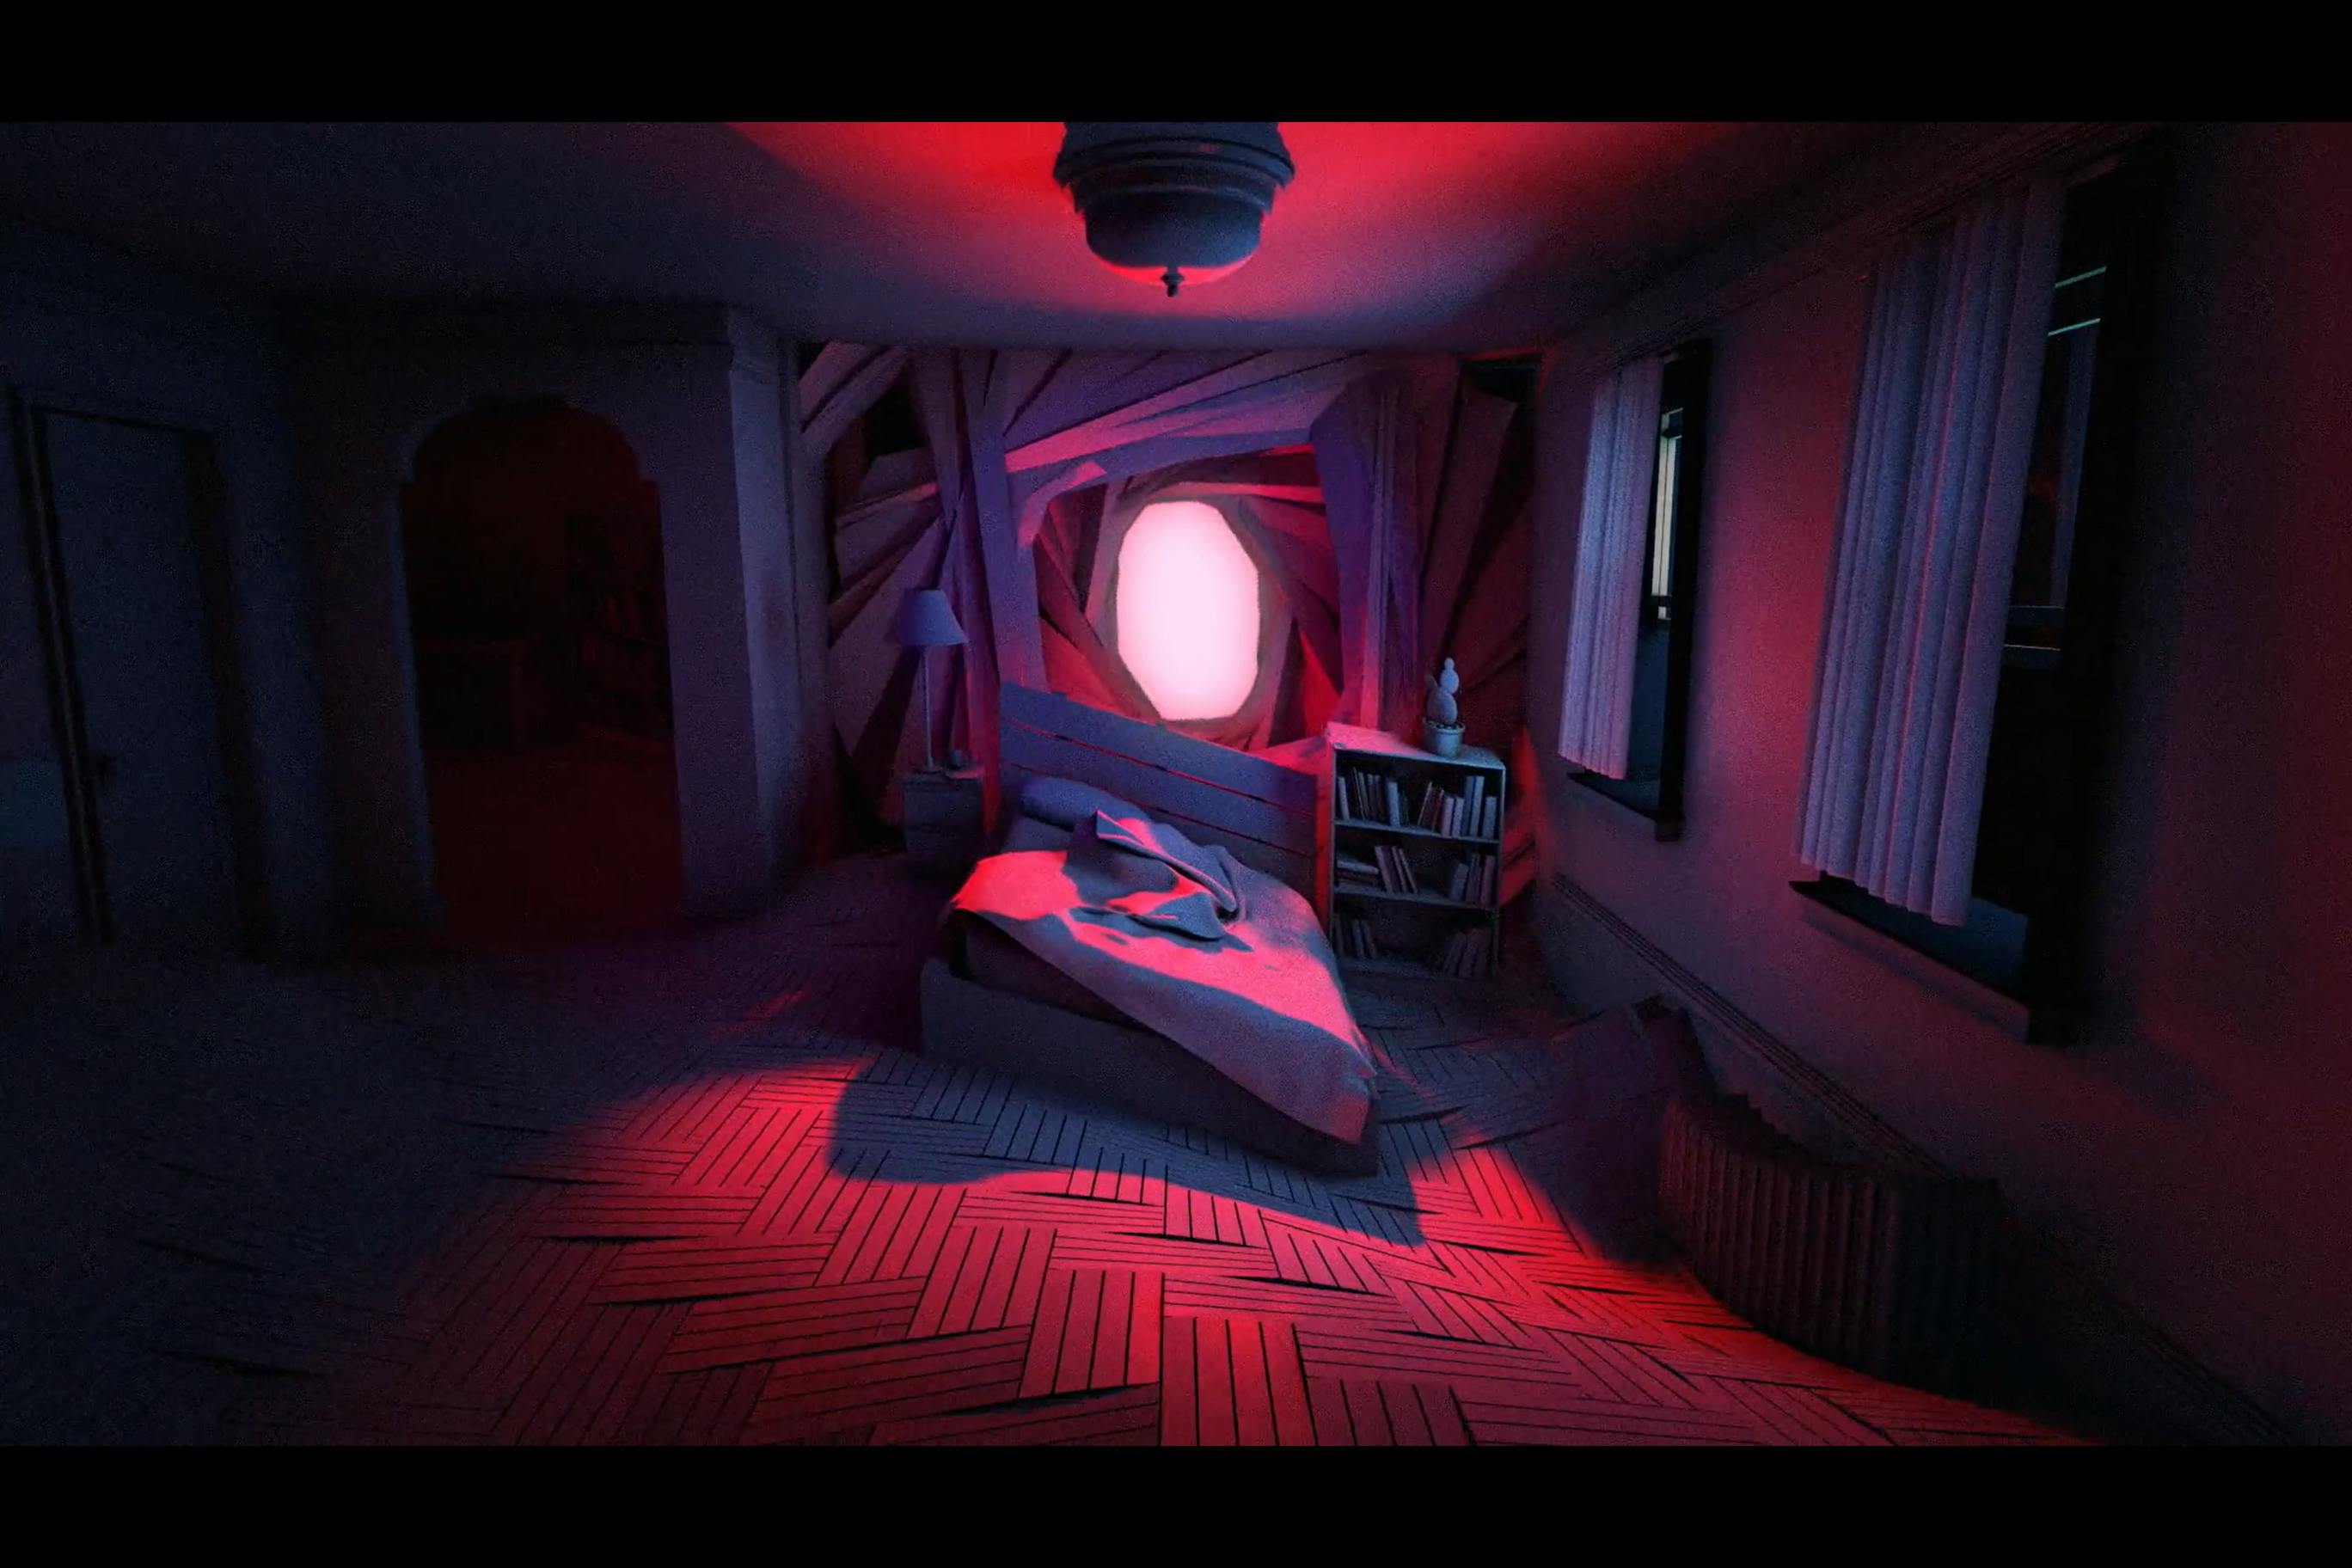 Screenshot from Andy Kennedy's Slow Wave (2016). Image is of a warped bedroom, looking at the bed on a tilt, wiht a night stand next to it. There are two windows on the right wall and a light above the bed. There is a portal directly above the headboard of the bed radiating a bright neon pink that douses the room with its light.